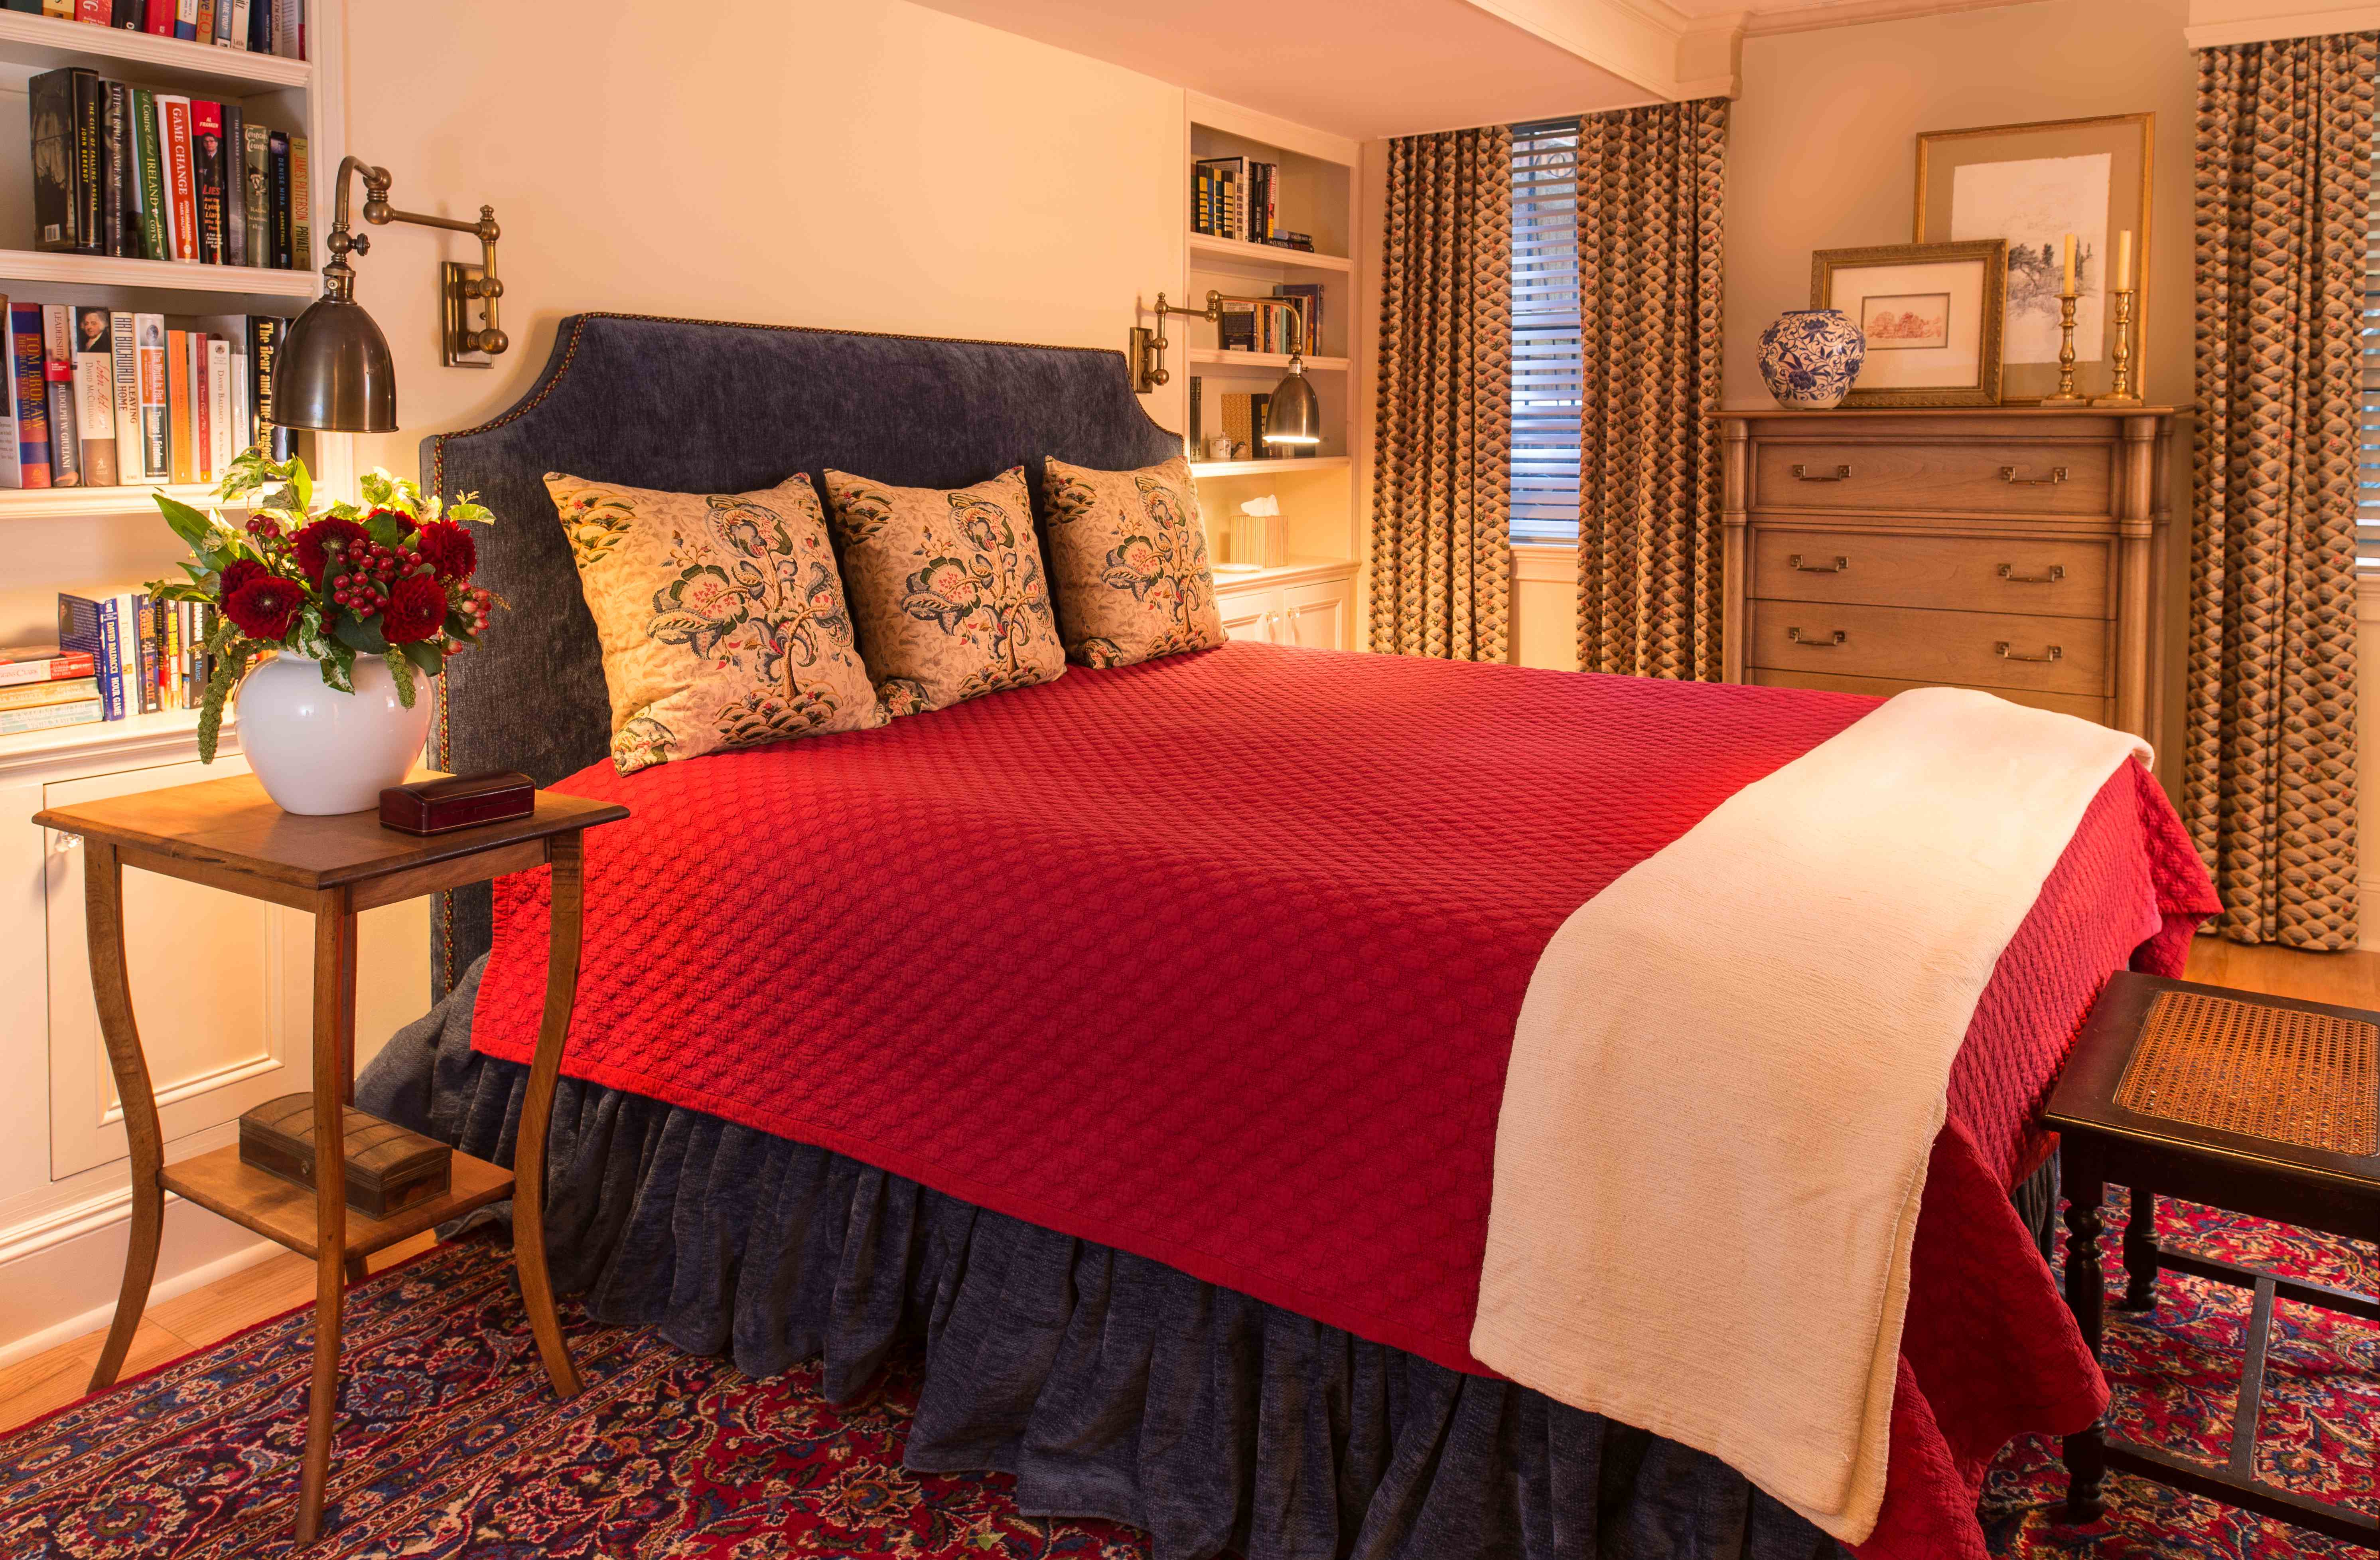 This traditional bedroom design by Elizabeth Swartz Interiors of Boston gets romantic without being too feminine by utilizing soft and luxurious textiles in rich jewel tones and reds, as well as big throw pillows, soft lighting and fresh flowers.